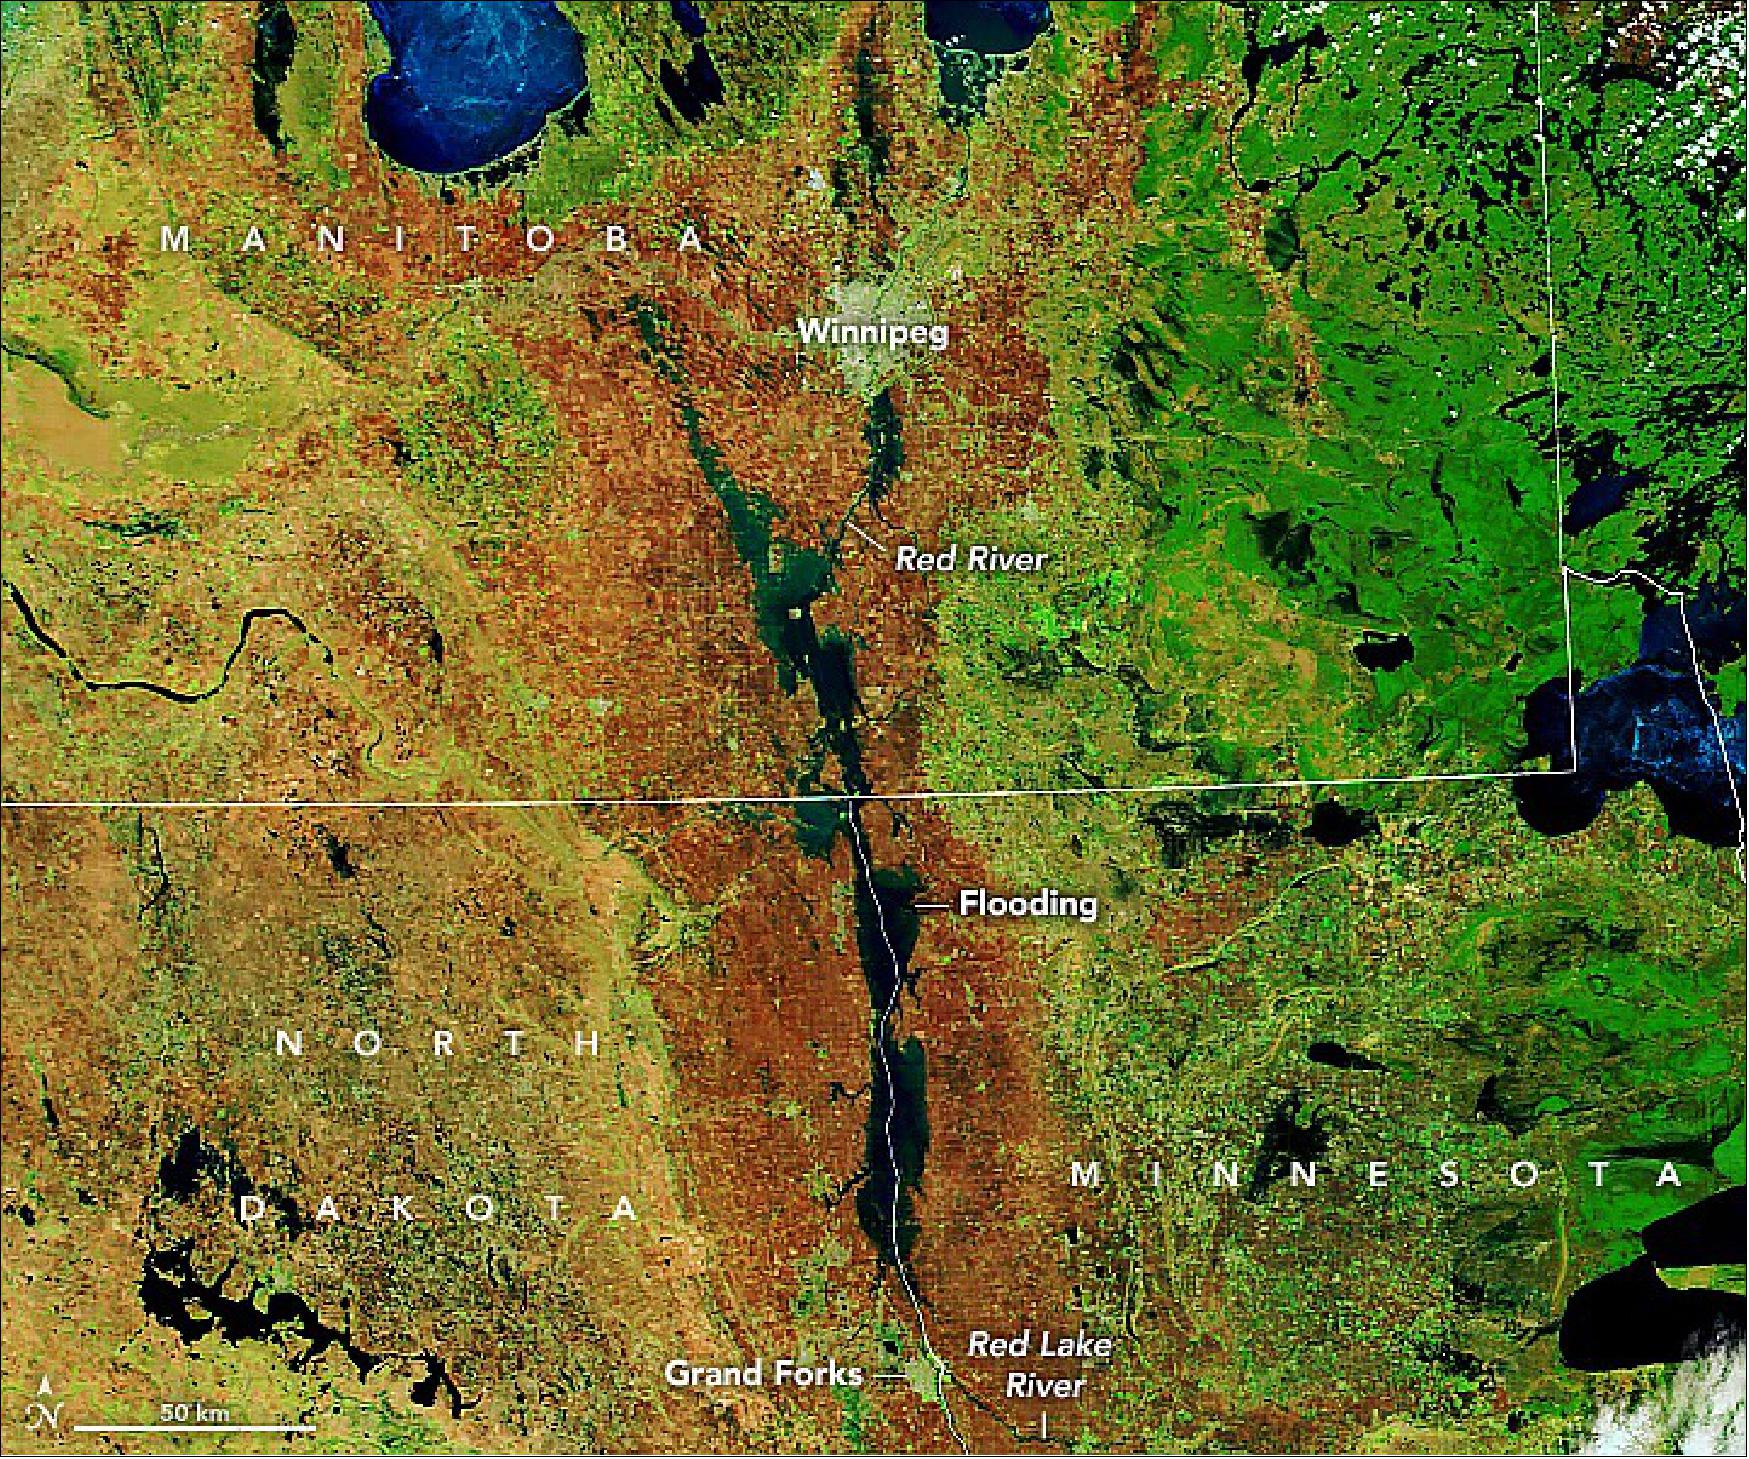 Figure 19: A blizzard, multiple rainstorms, and melting winter ice swelled rivers out of their banks and across a flat floodplain in Minnesota, North Dakota, and Manitoba. The false-color image was acquired with the MODIS instrument on NASA’s Terra satellite. This image shows the flooded valley as observed by Terra on May 10, 2022. The image combines shortwave infrared and visible light (MODIS bands 7-2-1) to better distinguish river water out of its banks (image credit: NASA Earth Observatory images by Lauren Dauphin, using MODIS data from NASA EOSDIS LANCE and GIBS/Worldview. Story by Michael Carlowicz)